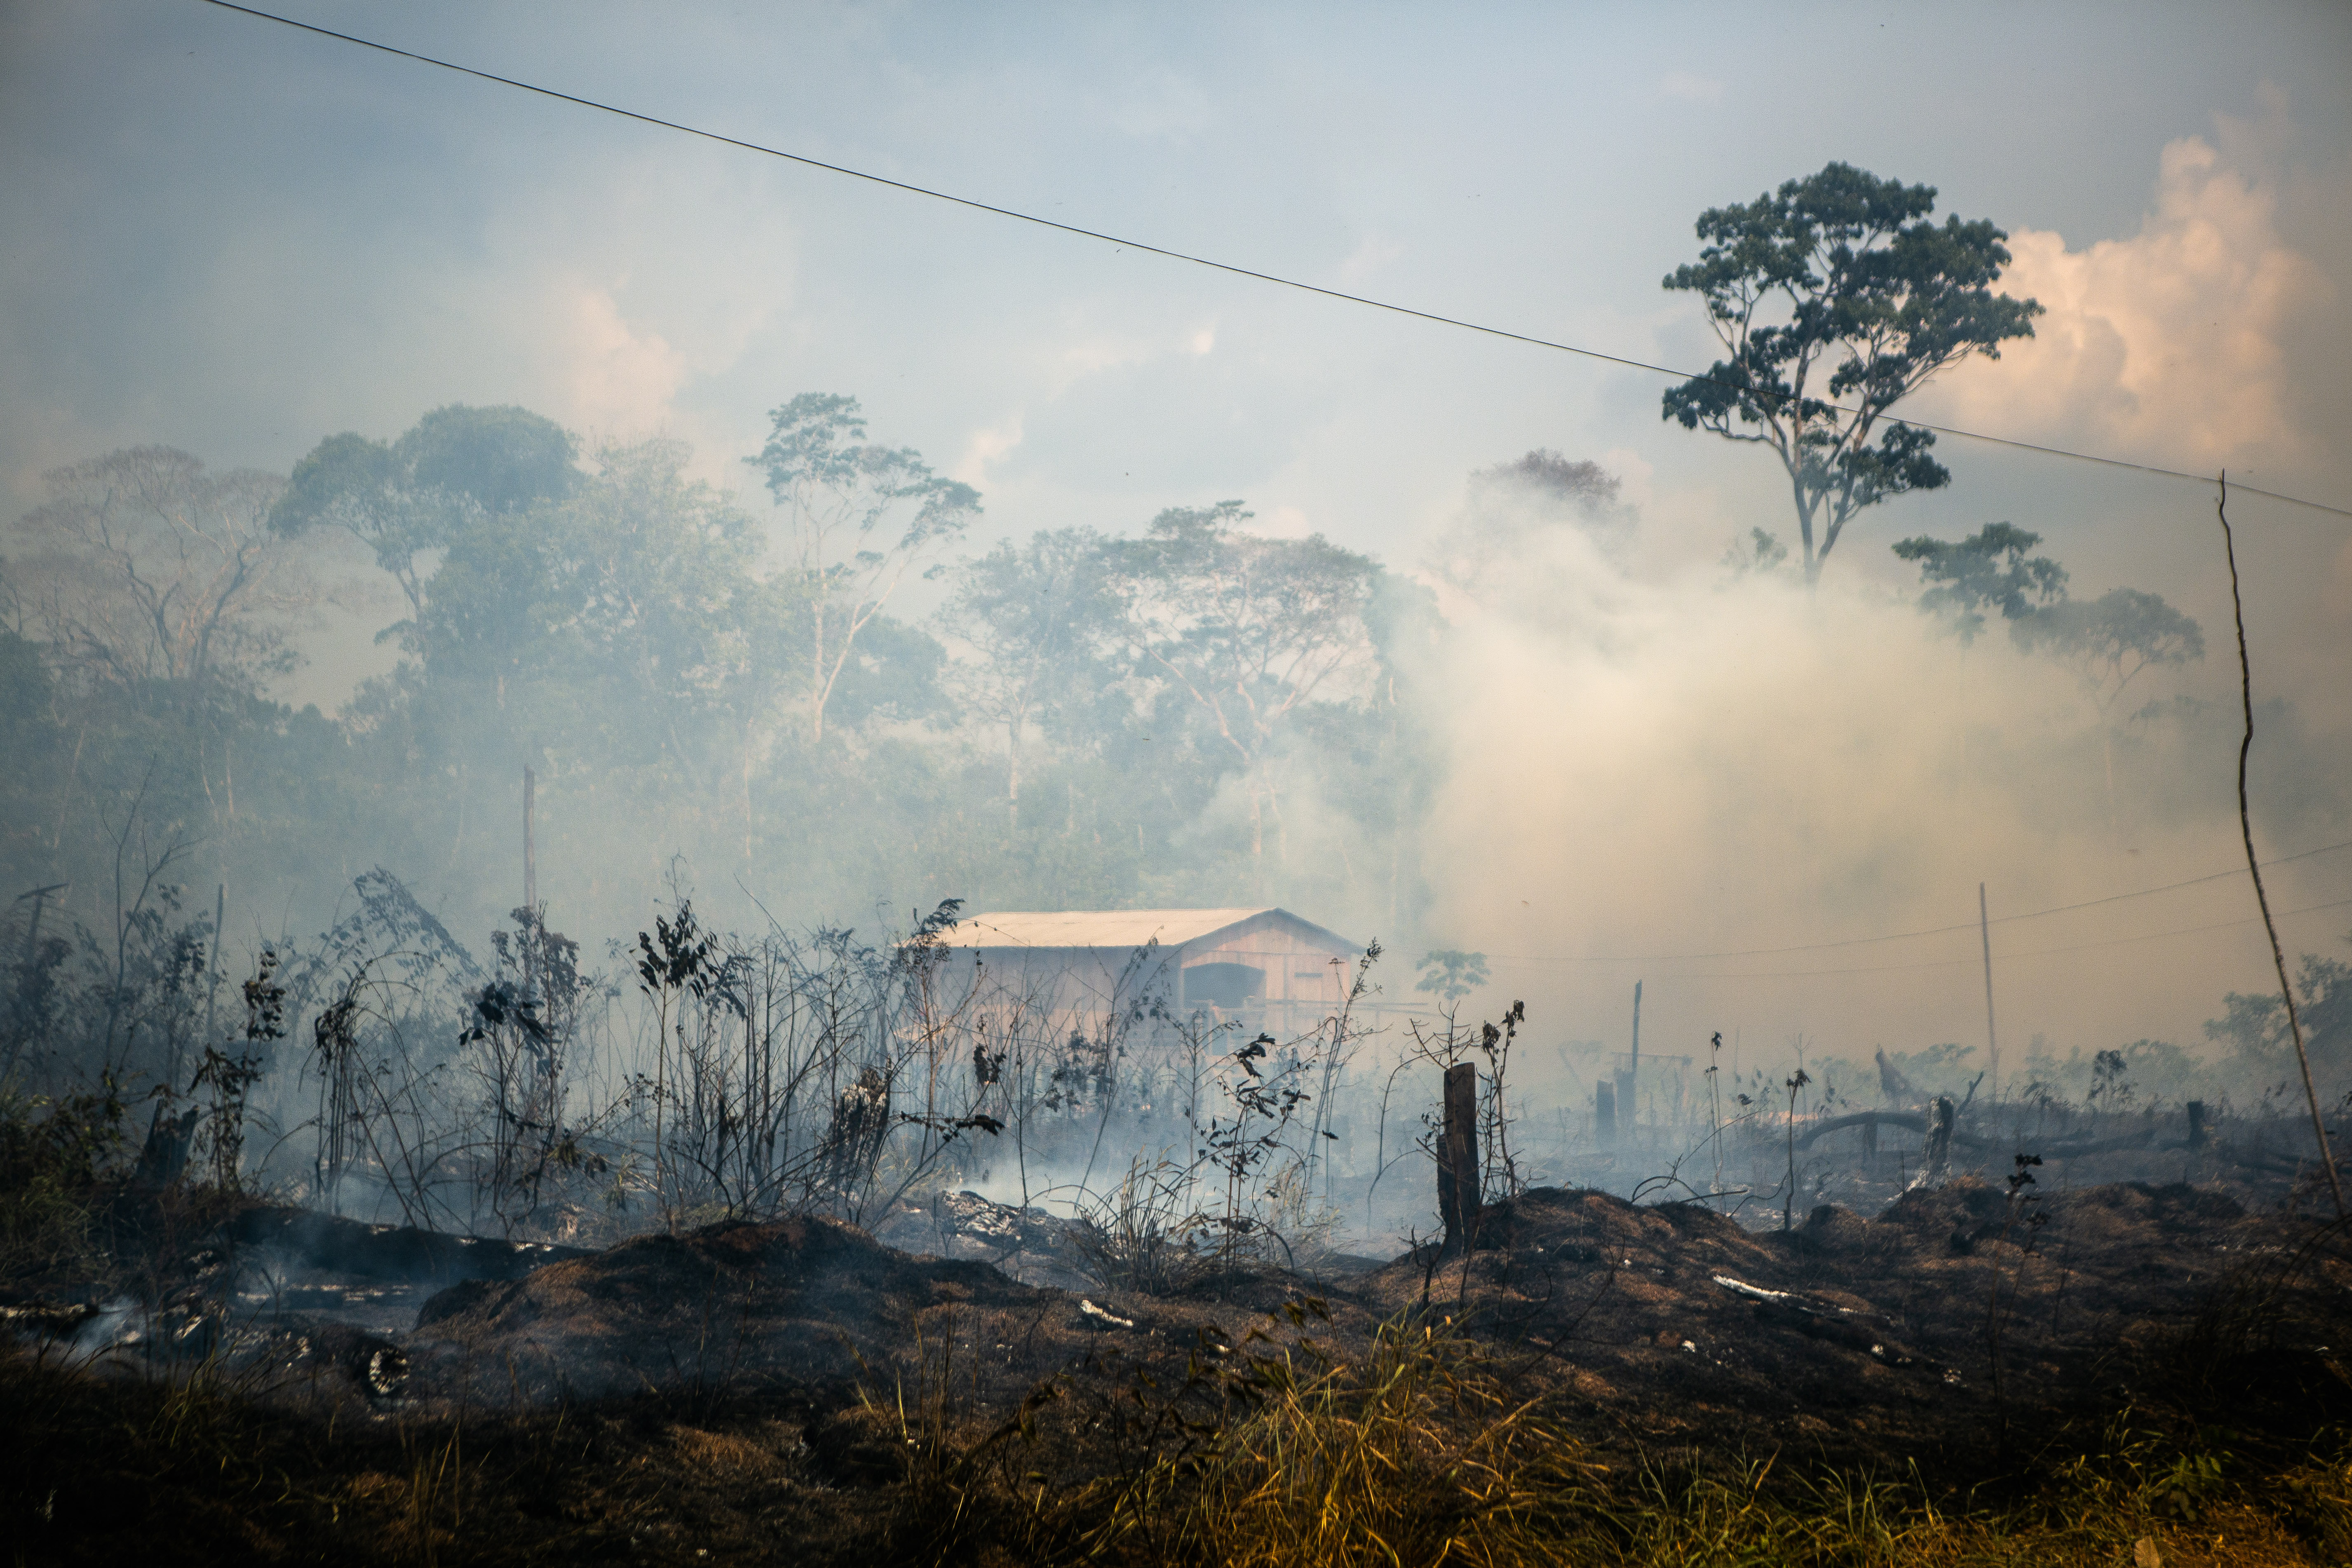 Areas of the Amazon devastated by the fires